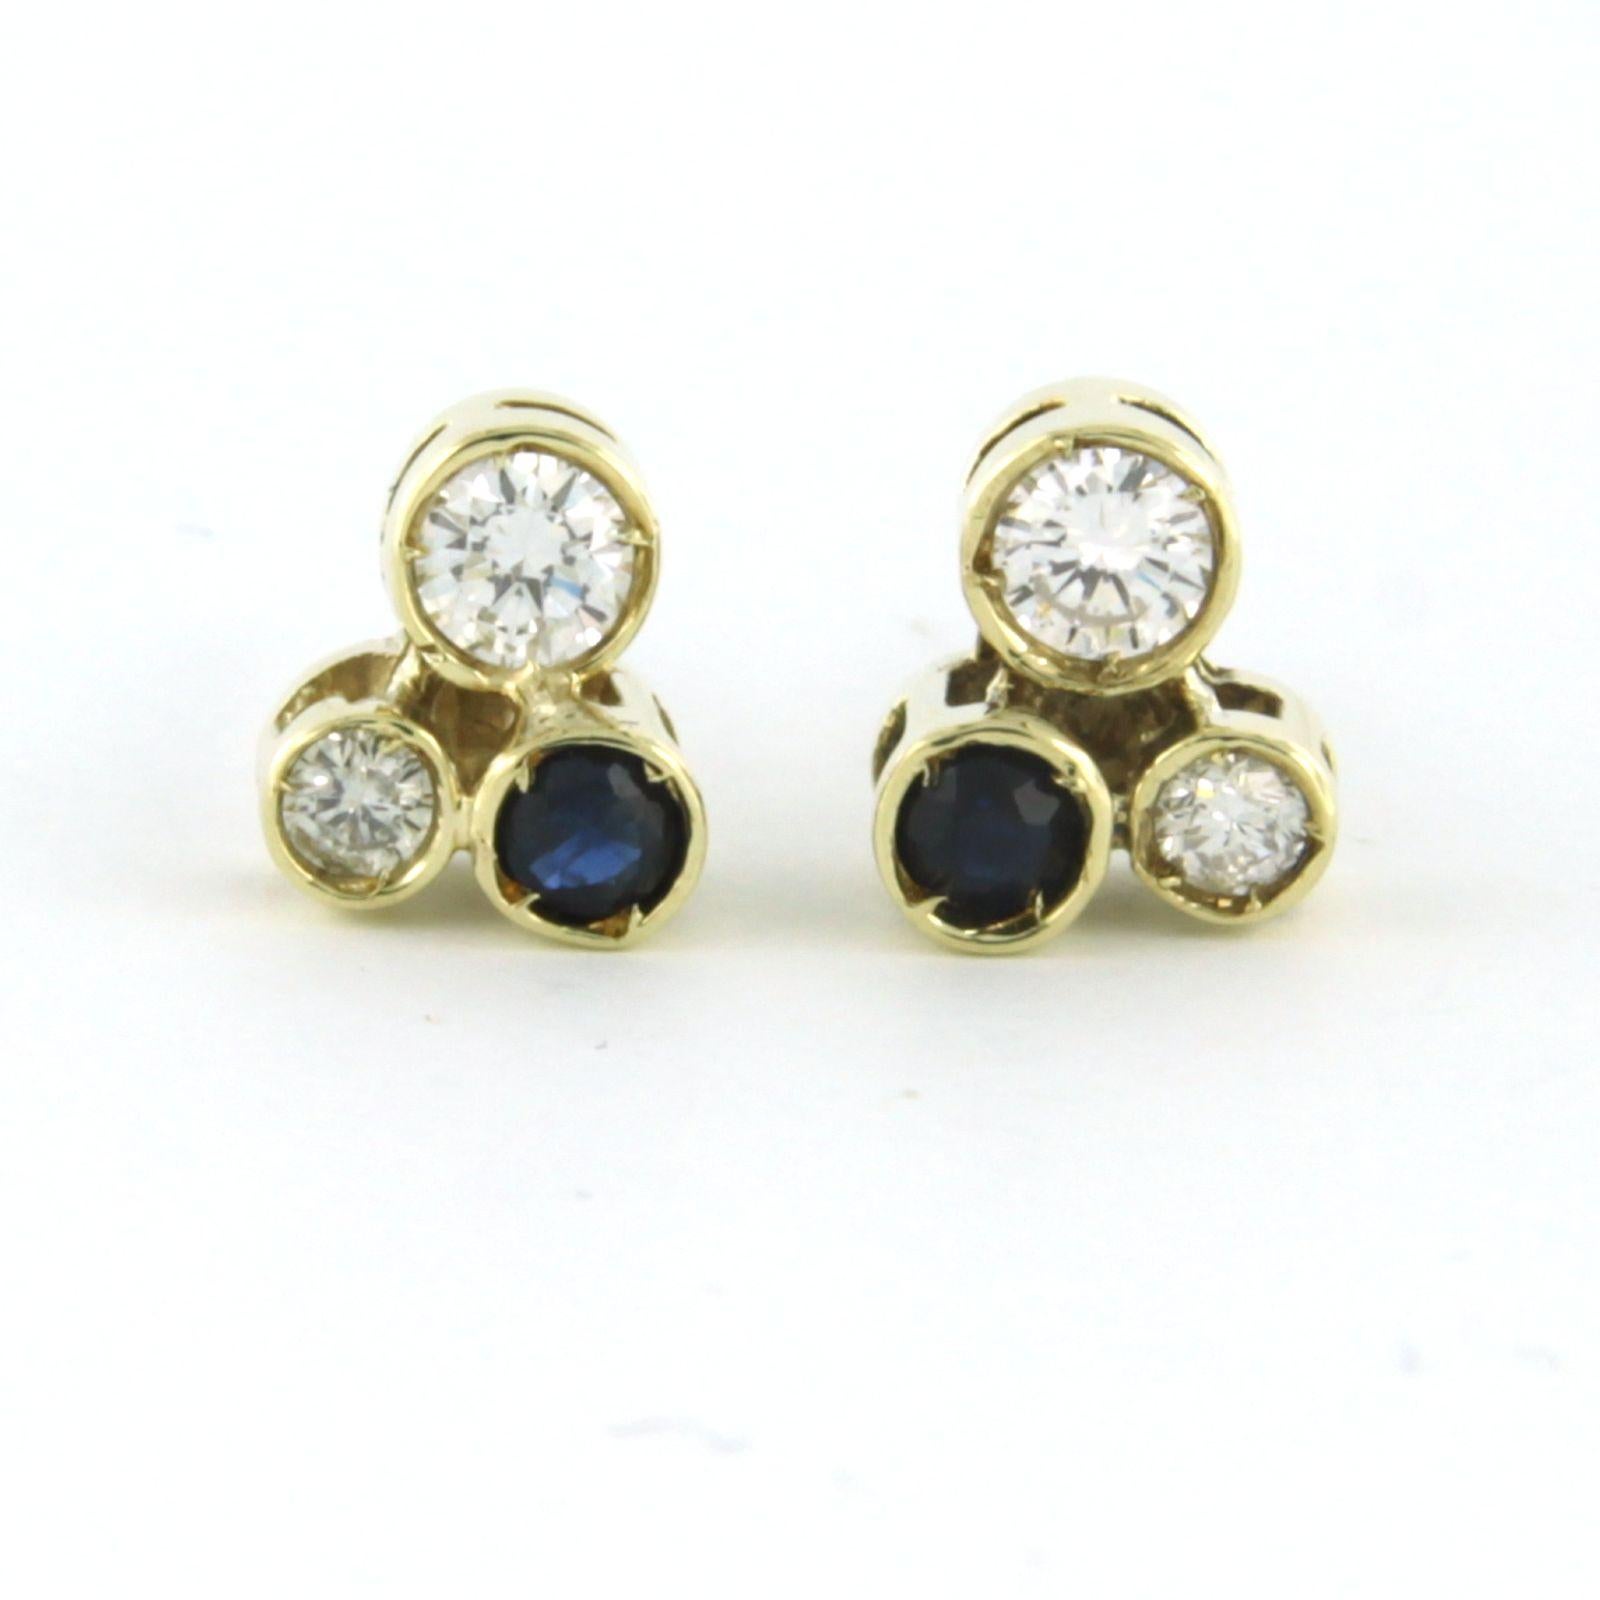 14k yellow gold stud earrings set with sapphire and brilliant cut diamonds. 0.40ct - G/H - VS/SI

detailed description:

the top of the ear stud is 7.6 mm by 6.6 mm wide

weight: 2.2 grams

occupied with :

- 2 x 3.2 mm round facet cut heated